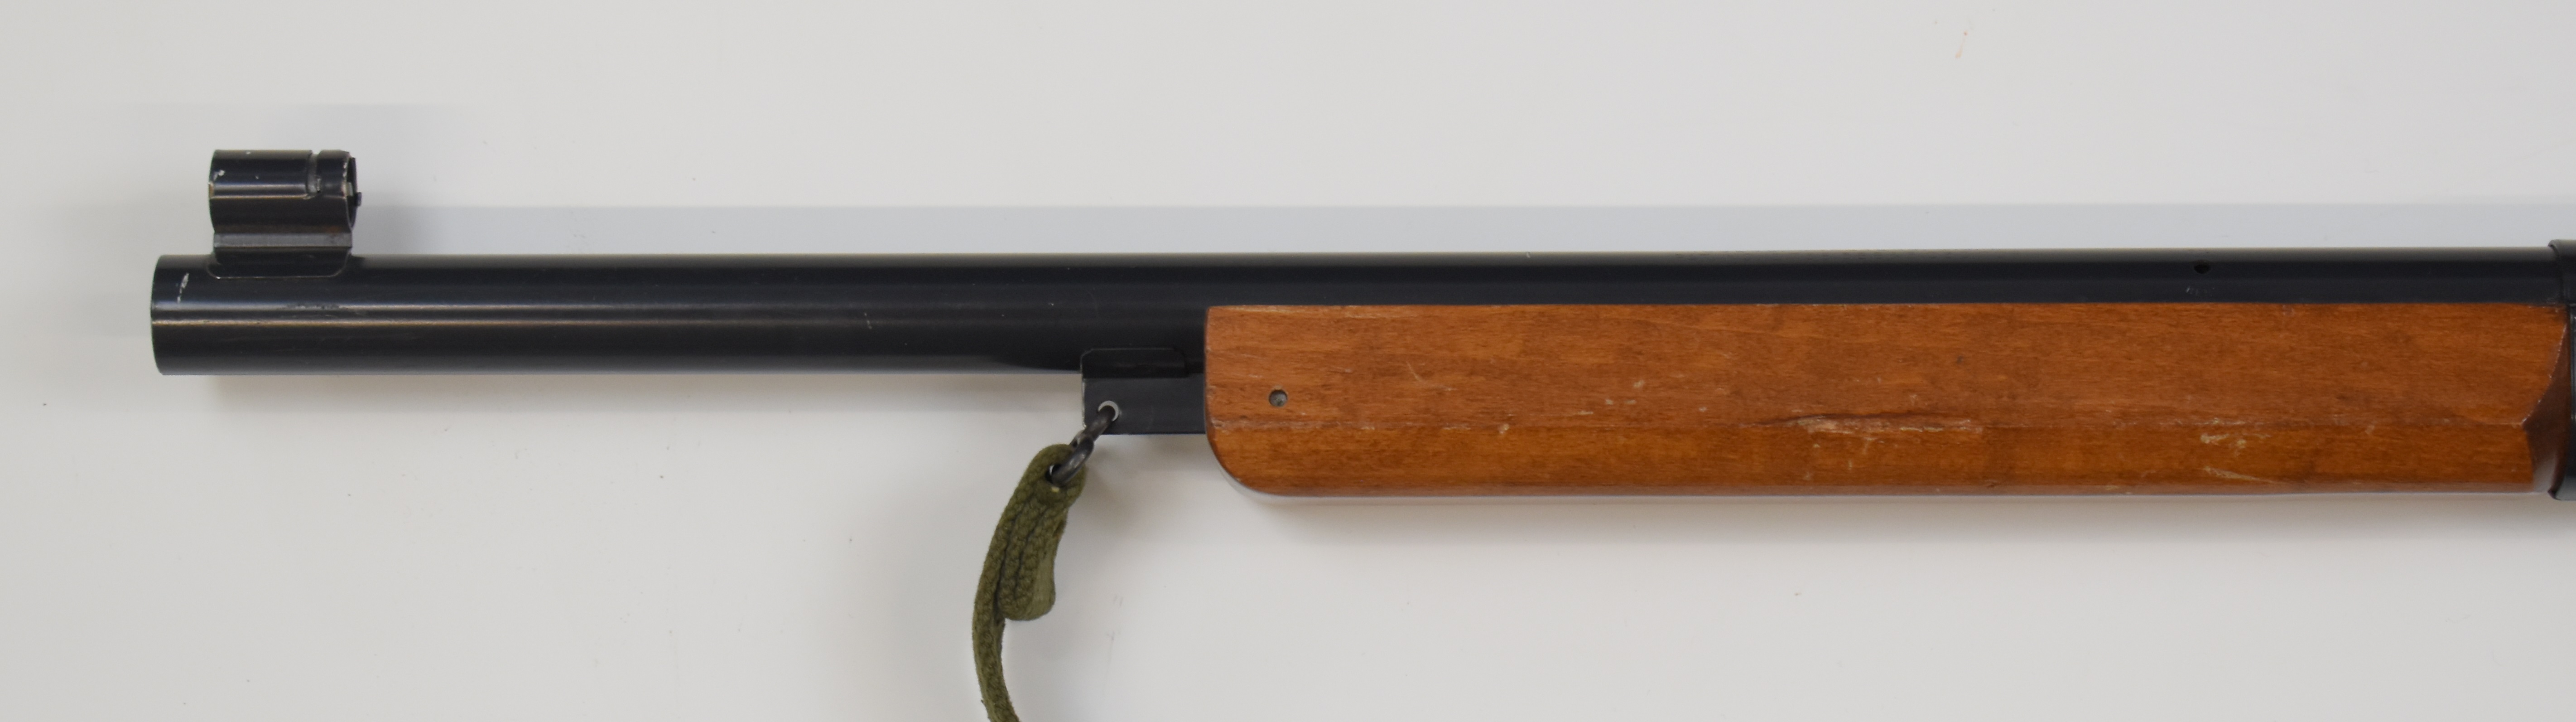 Daisy Model 99 Winchester style underlever-action air rifle with wooden grip and forend, canvas - Image 10 of 10